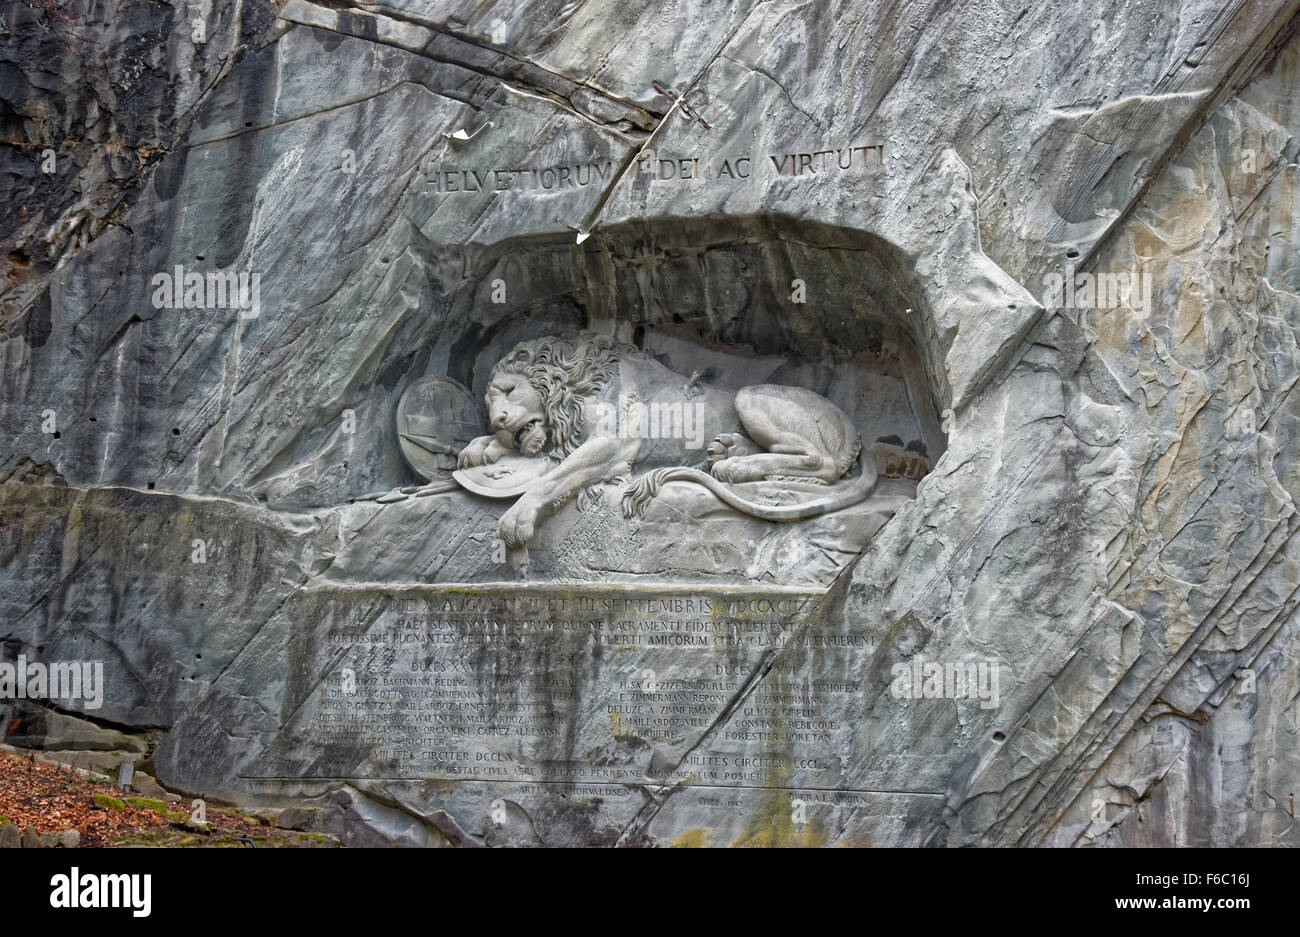 Dying Lion monument, a sculpture in Lucerne (Switzerland) carved in the rock to honor Swiss Guards who were massacred during the French Revolution when revolutionaries stormed the Tuileries Palace Stock Photo